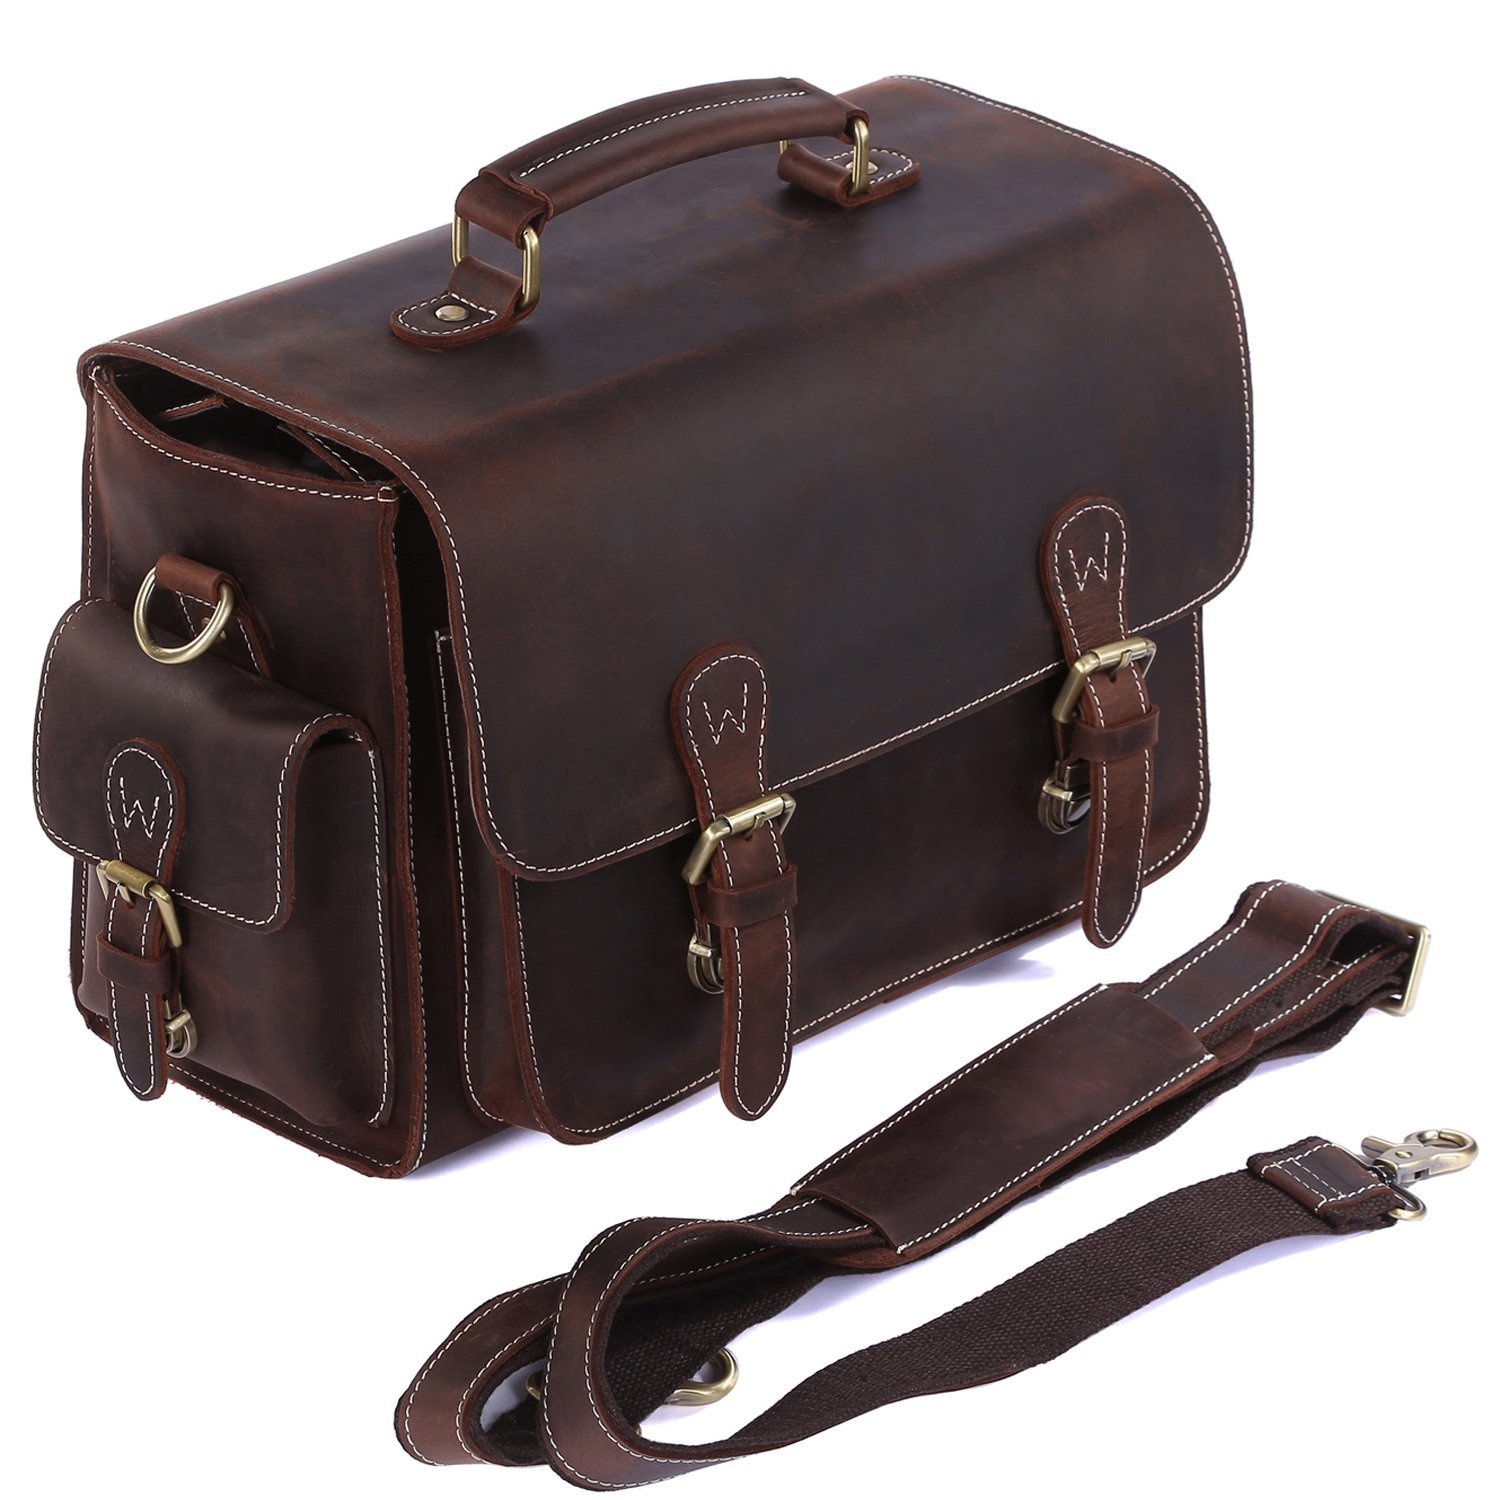 S-ZONE Leather DSLR Bag, best leather camera bags, leather bags for camera, leather camera backpack